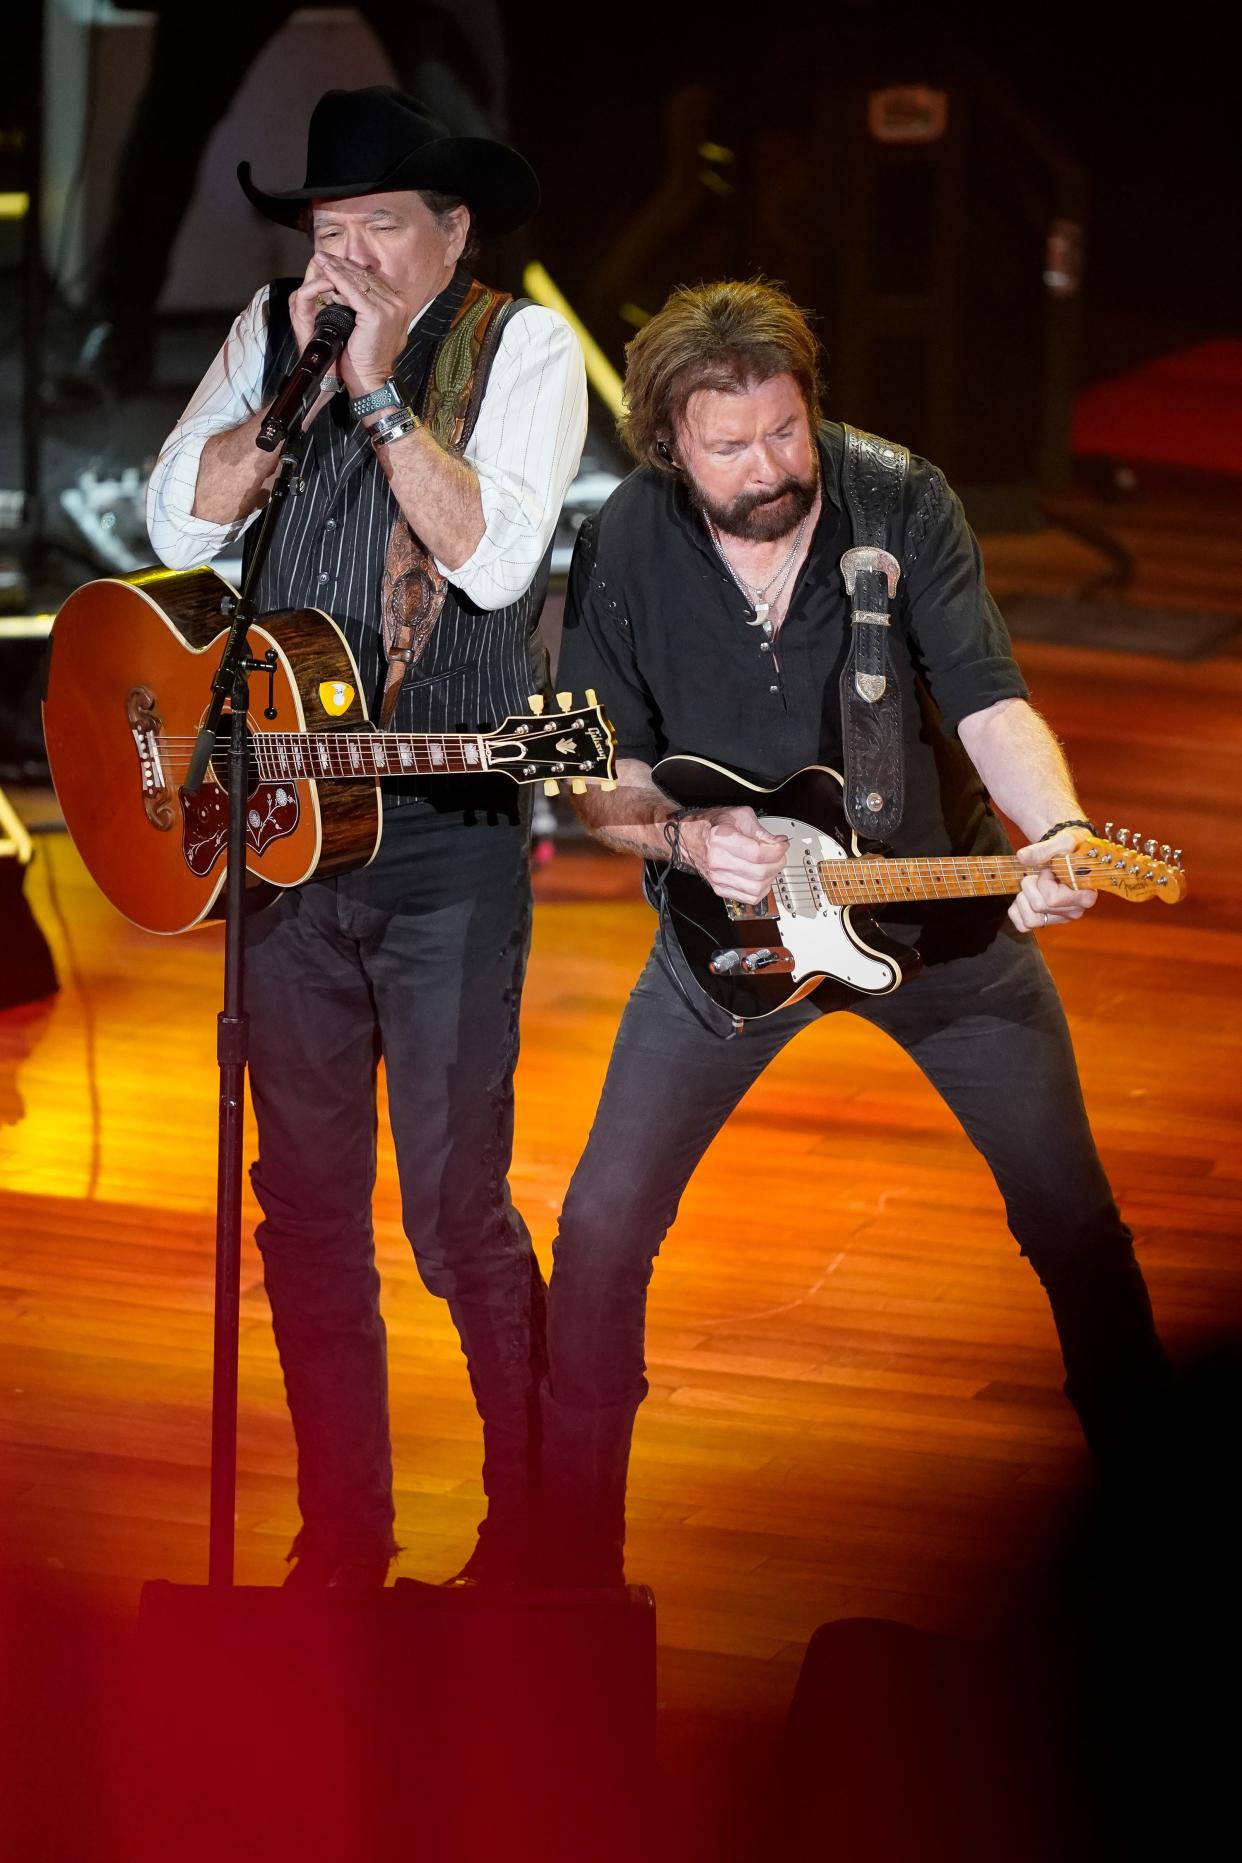 Chart-topping country artists Brooks & Dunn will perform at Nationwide Arena on June 16, along with Scotty McCreery.